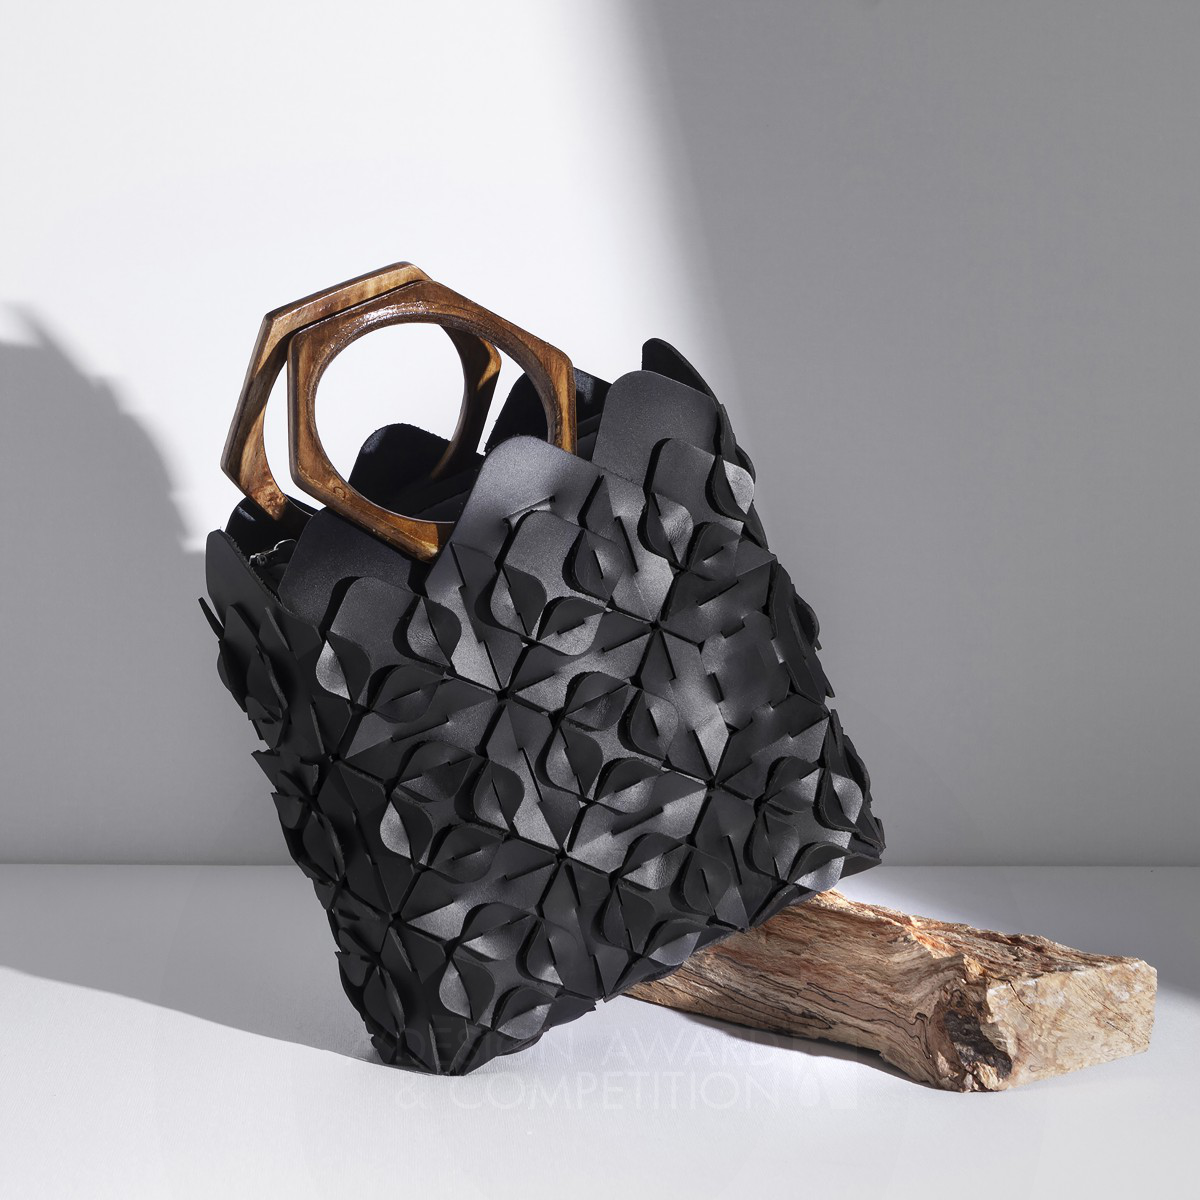 Olka Non Stitched Bag by Maryam Hosseini Bronze Fashion and Travel Accessories Design Award Winner 2024 